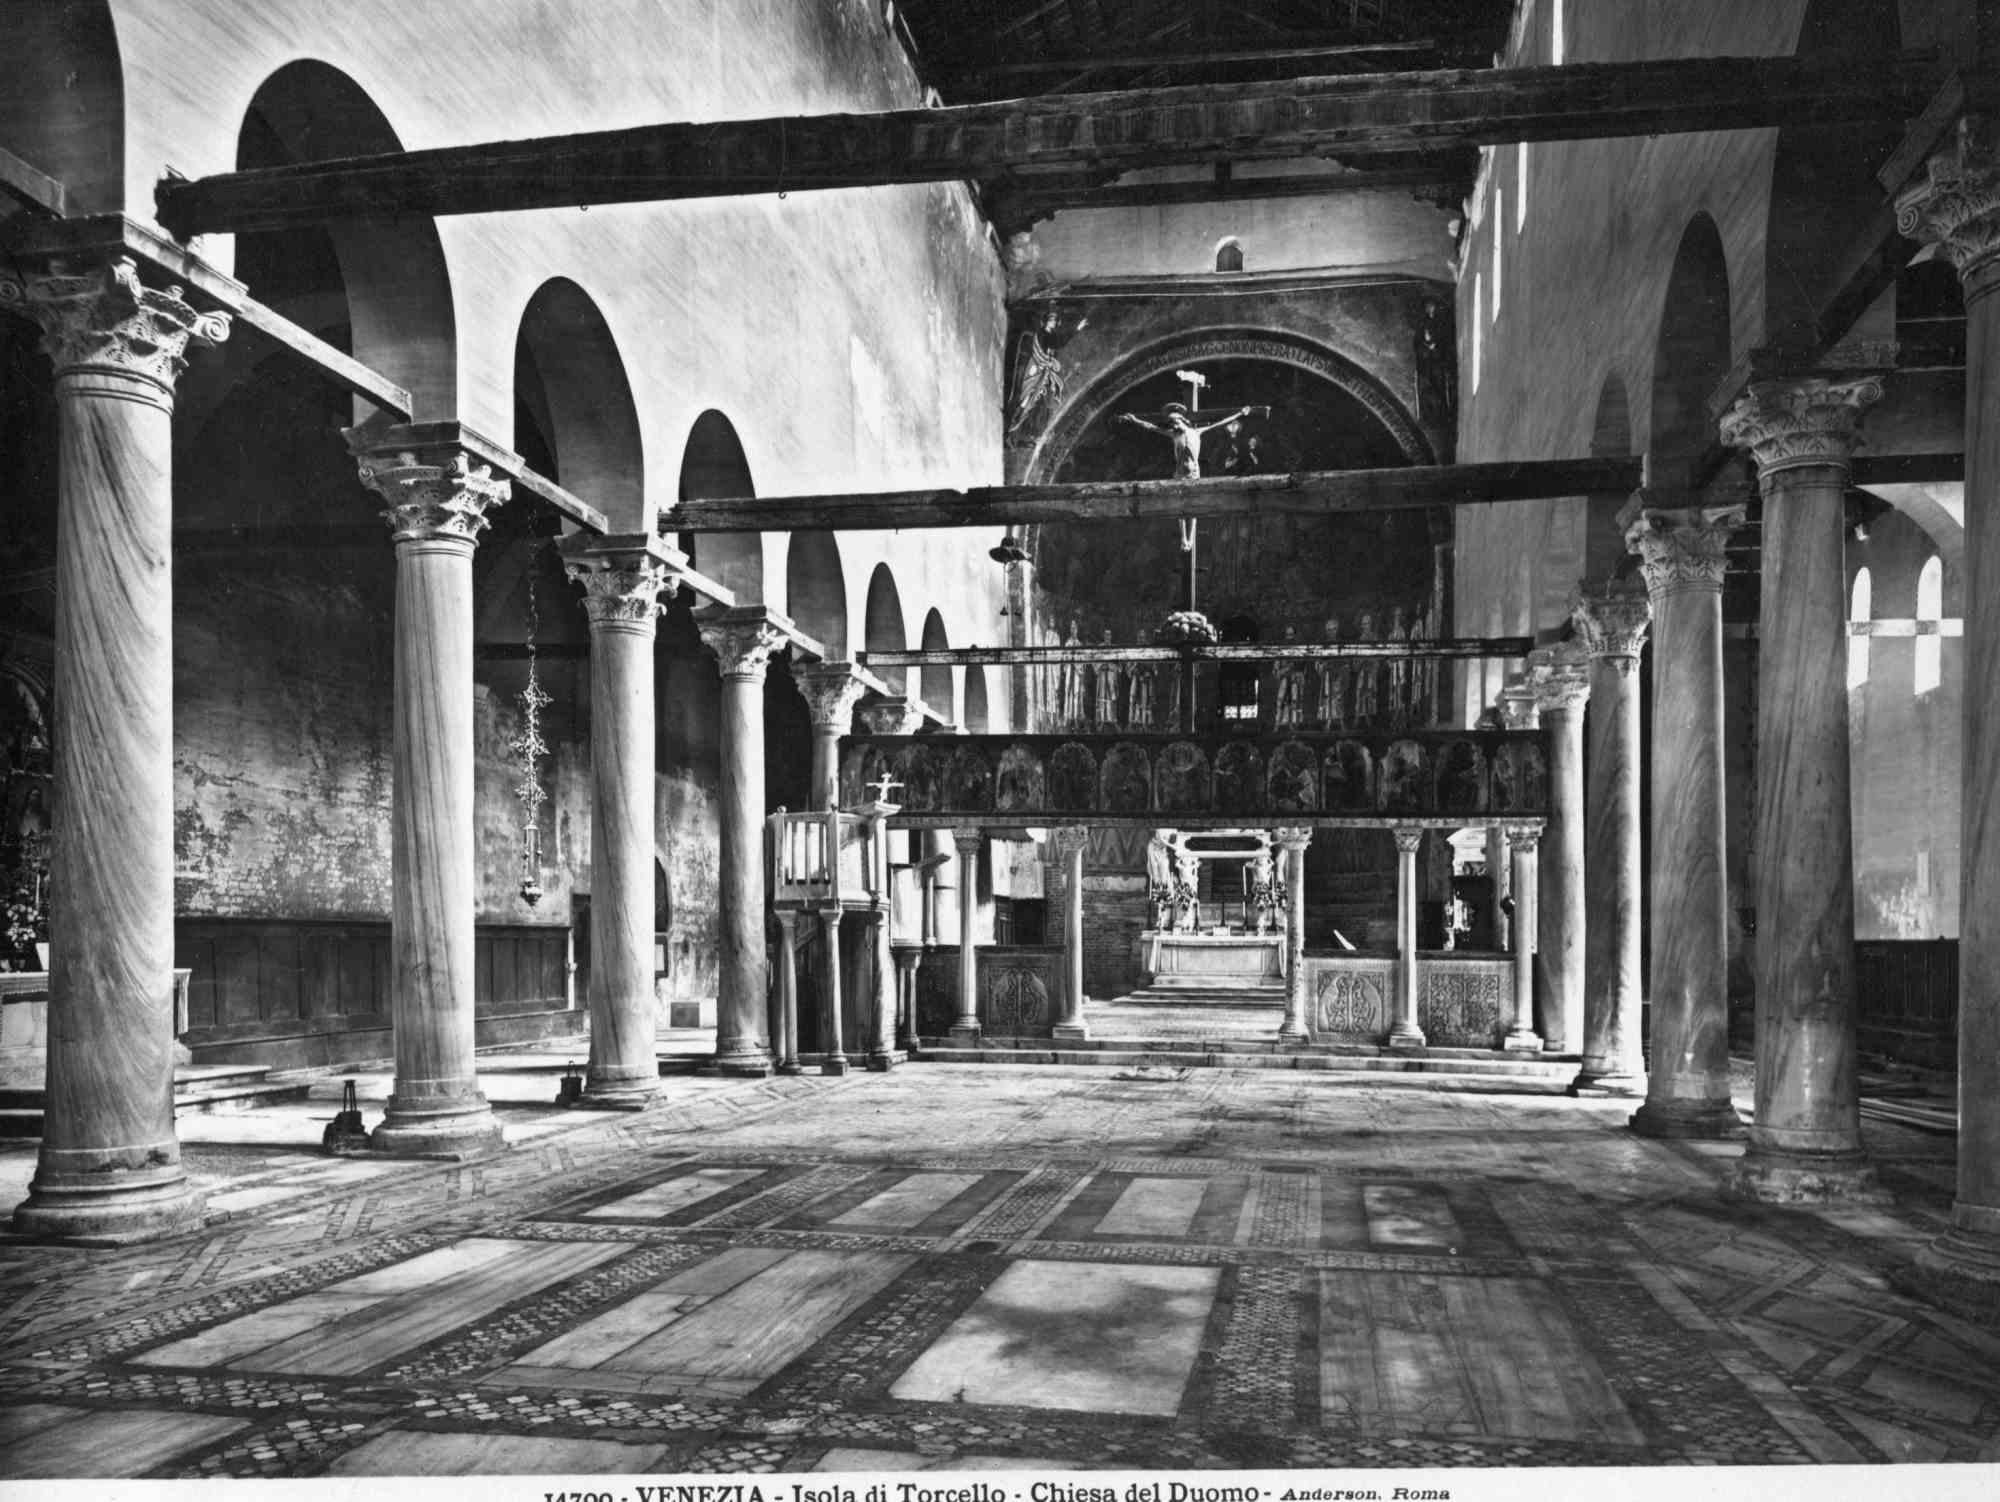 Unknown Figurative Photograph - Torcello’s Cathedral - VintagePhotograph - Early 20th Century